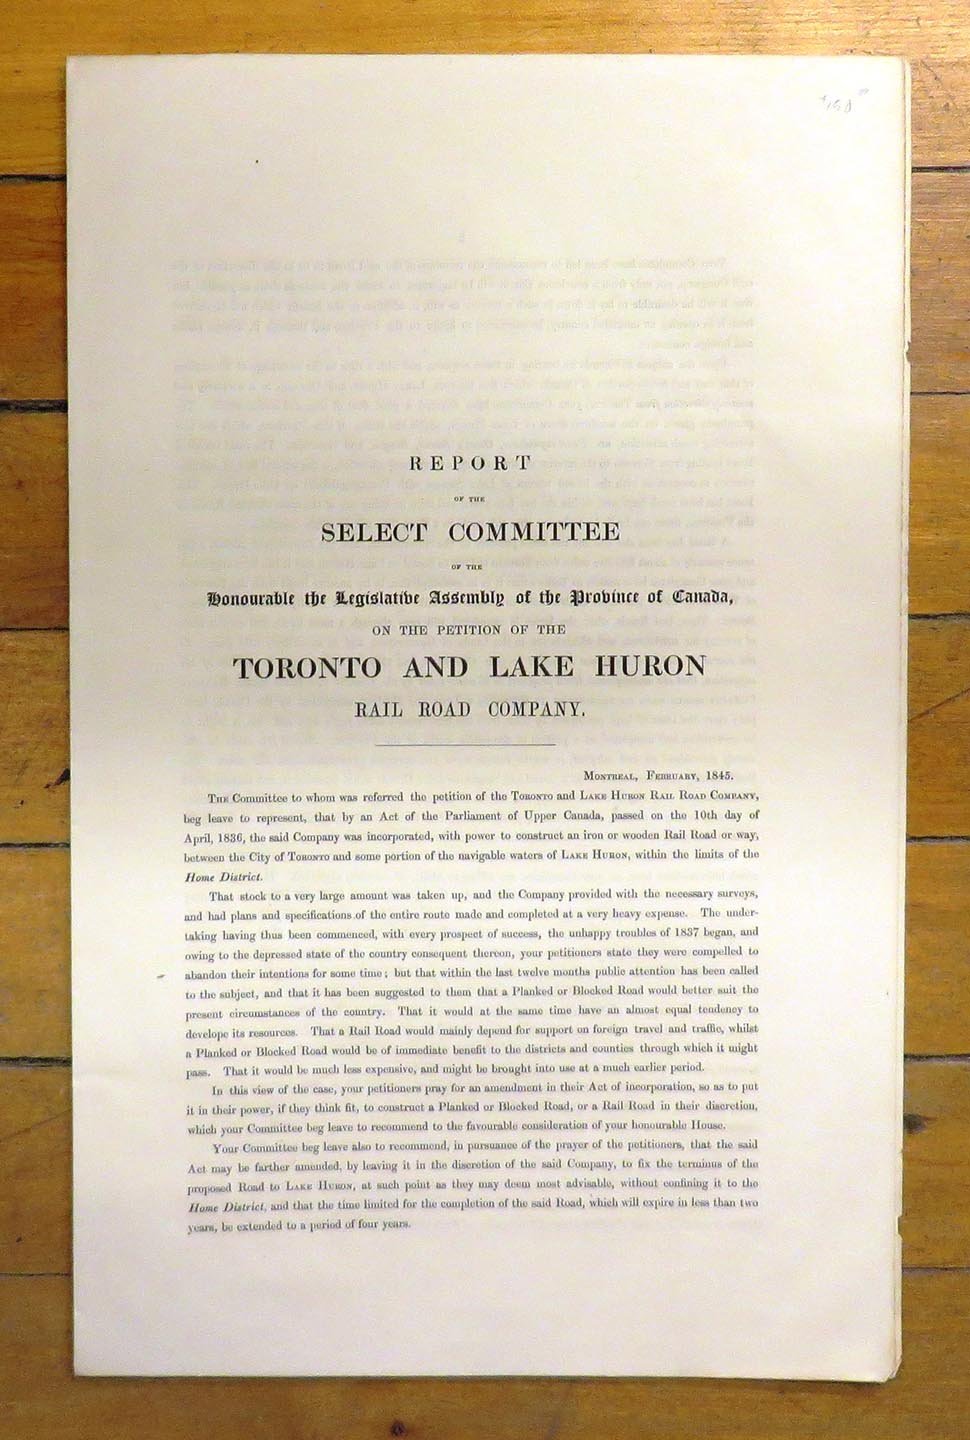 Report of the Select Committee of the Honourable the Legislative Assembly of the Province of Canada, on the petition of the Toronto and Lake Huron Rail Road Company